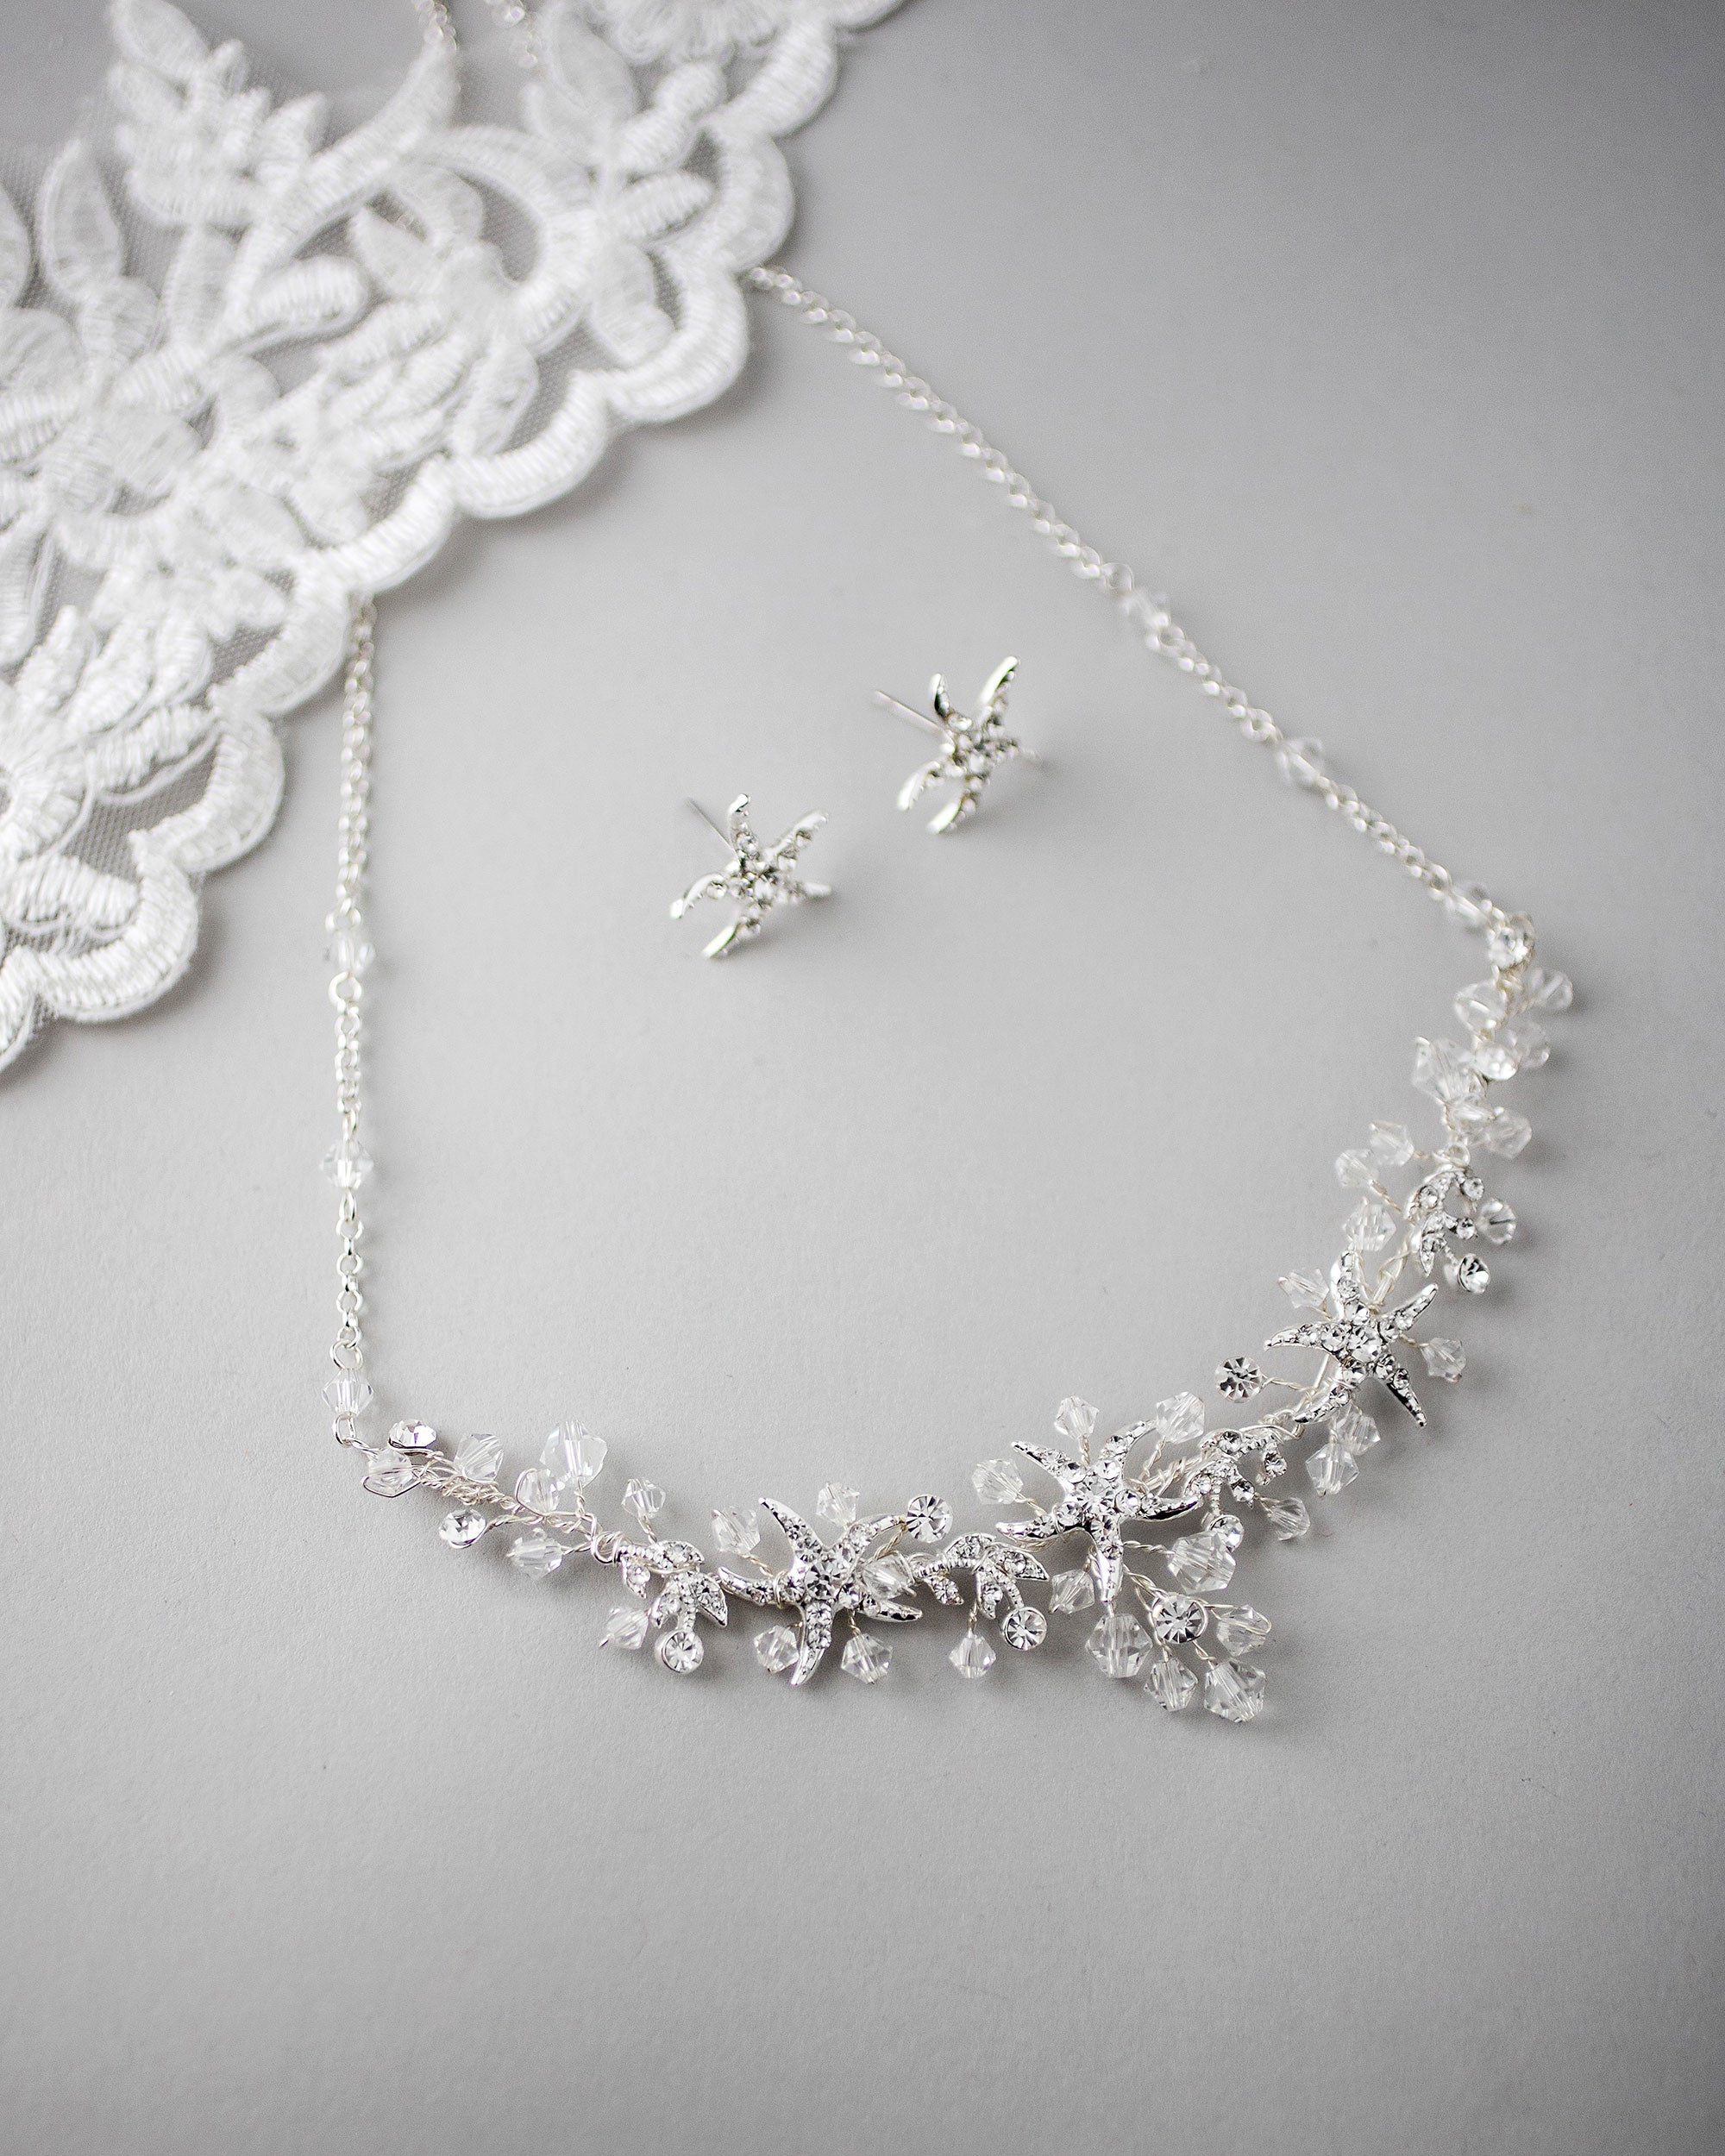 Beach Wedding Necklace with Crystals and Starfish - Cassandra Lynne